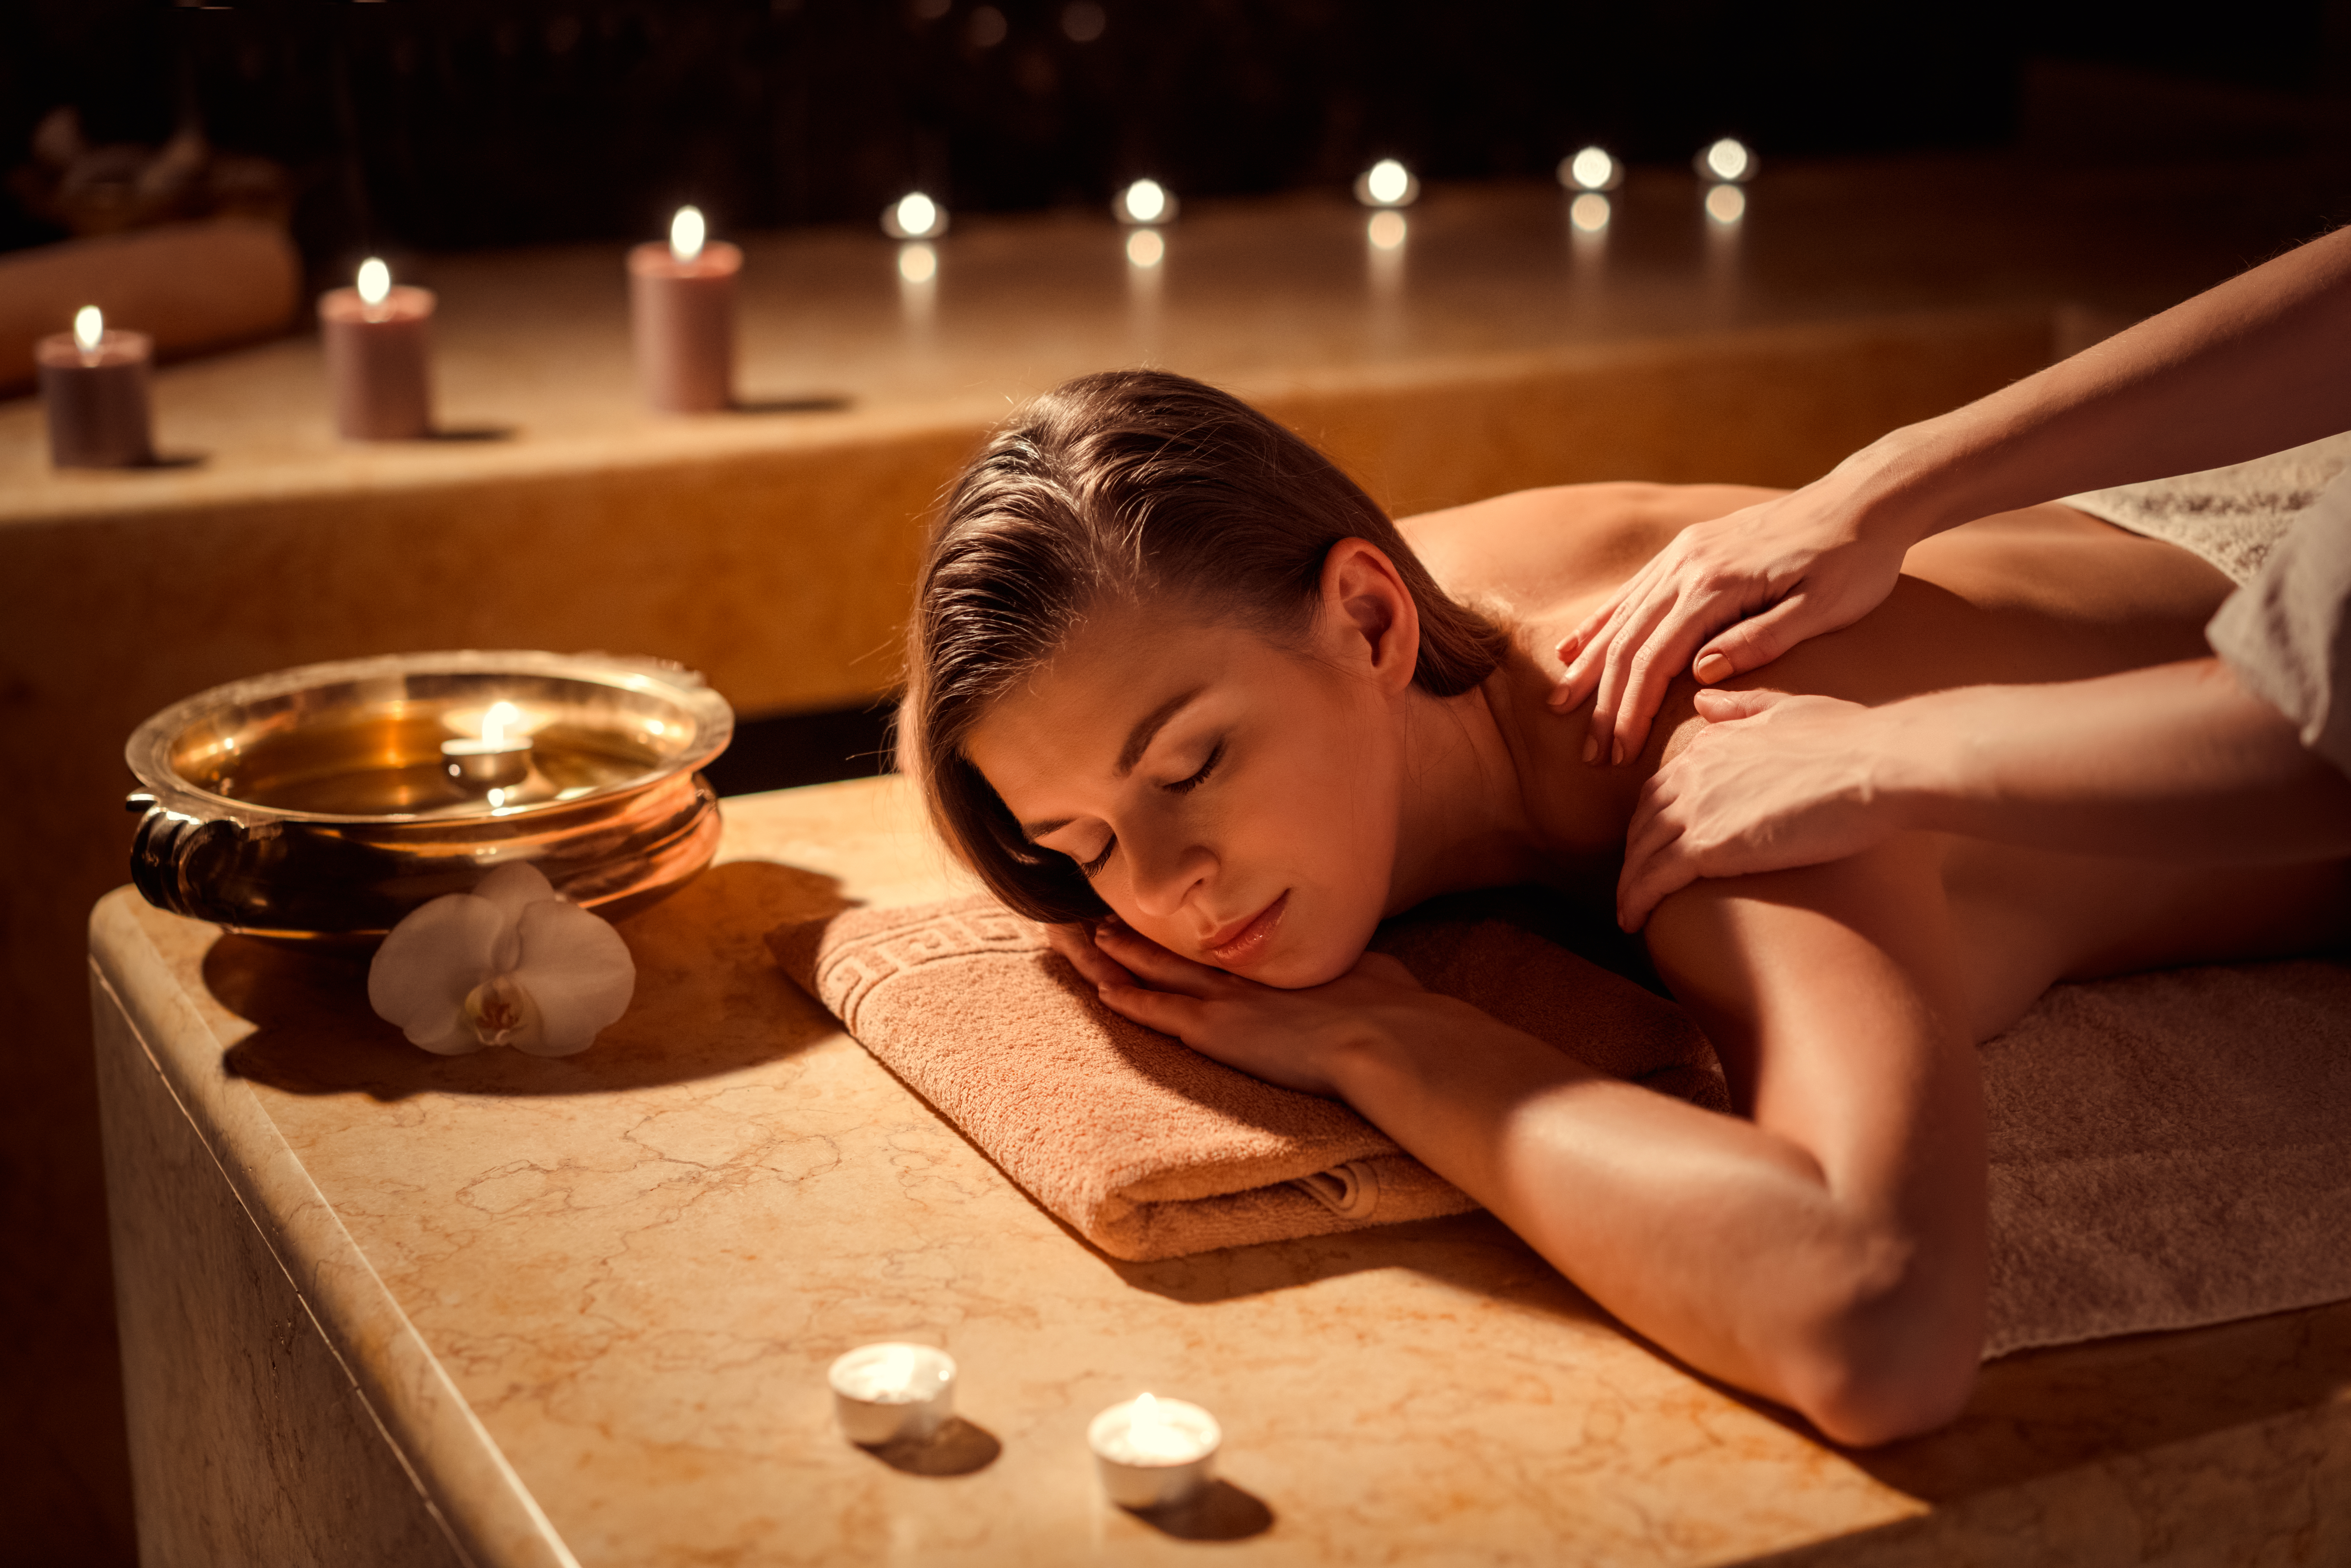 A woman getting a back massage at a spa